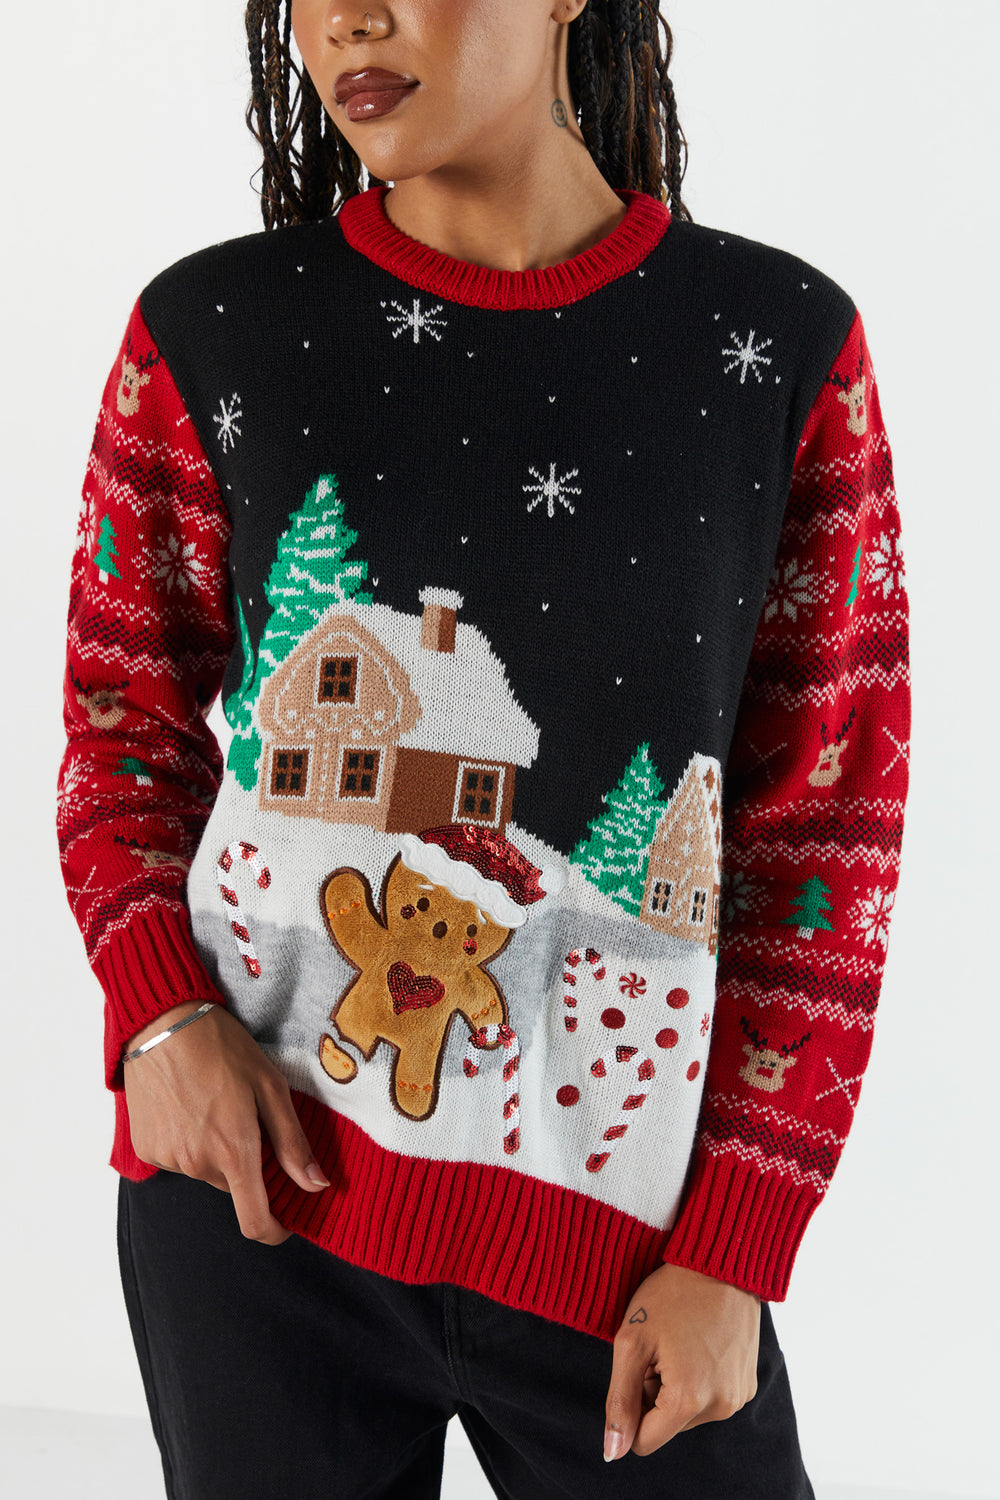 Gingerbread Christmas Sweater Gingerbread Christmas Sweater 2